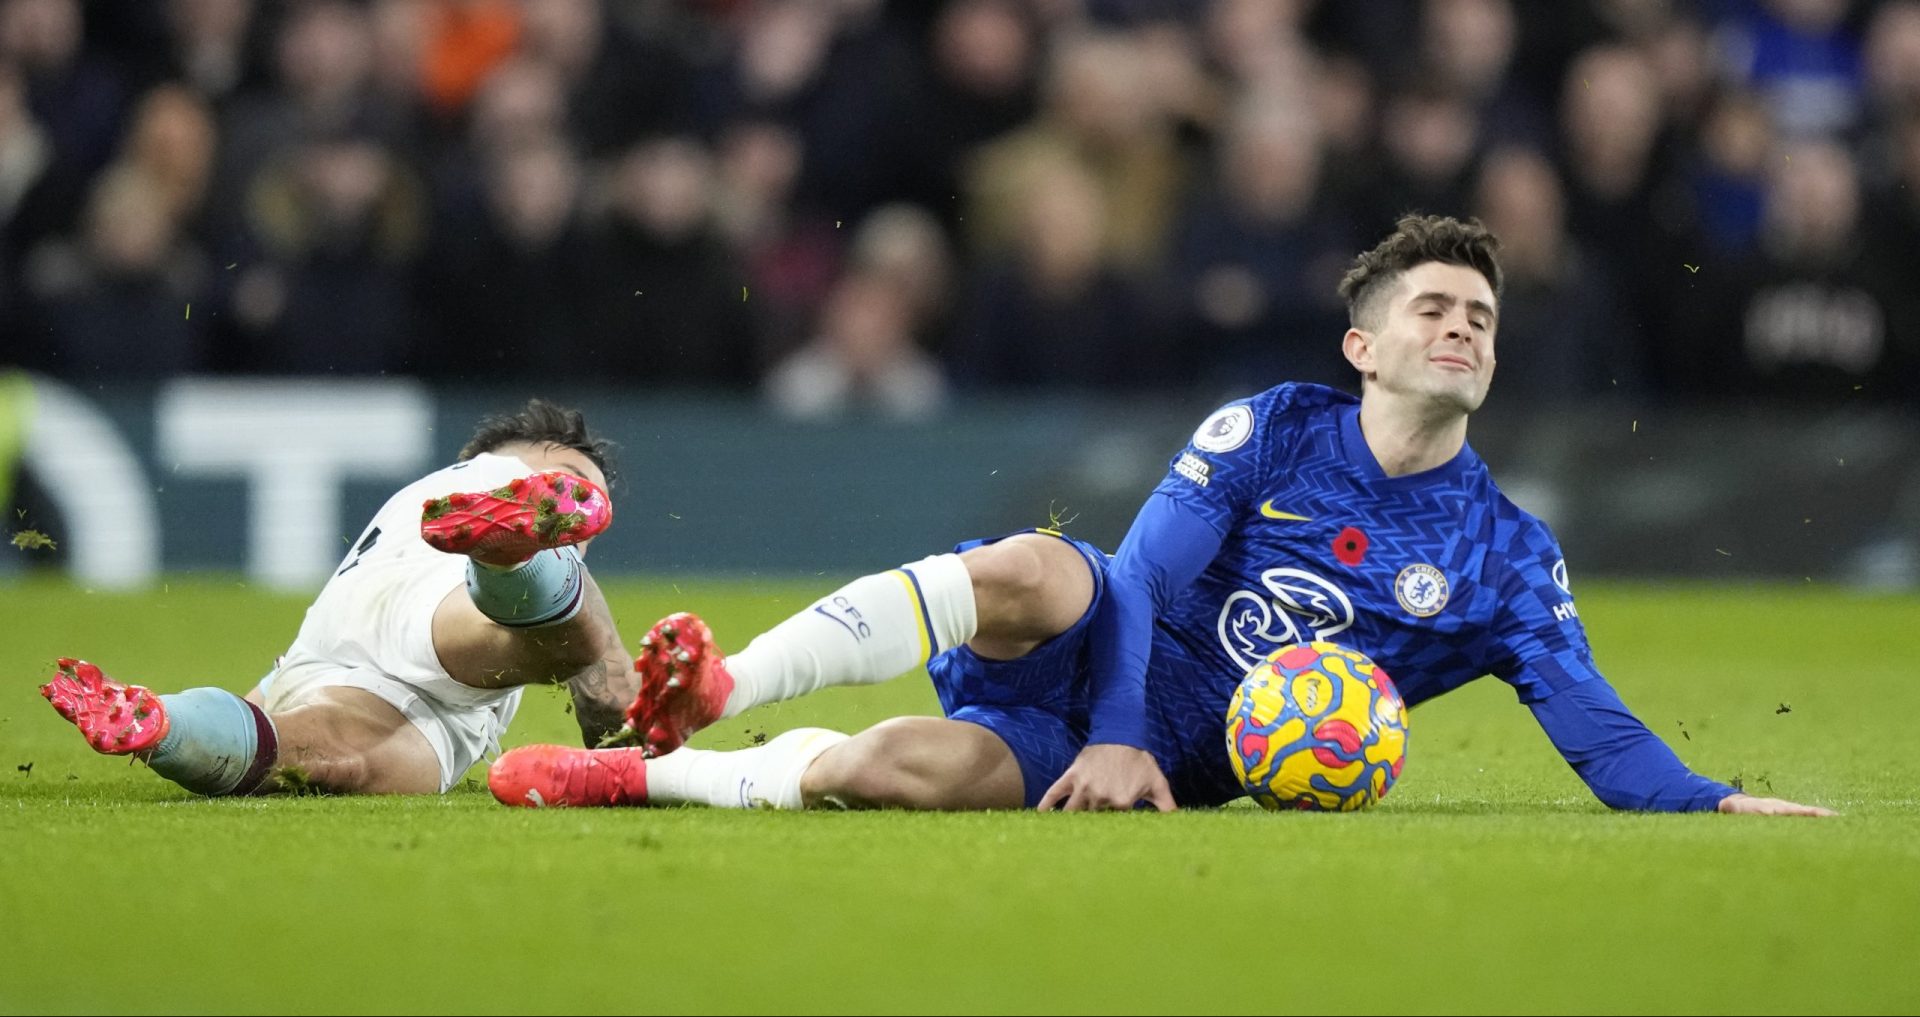 Burnley's Josh Brownhill, left, fights for the ball with Chelsea's Christian Pulisic during the English Premier League soccer match between Chelsea and Burnley at the Stamford Bridge stadium in London, Saturday, Nov. 6, 2021. 